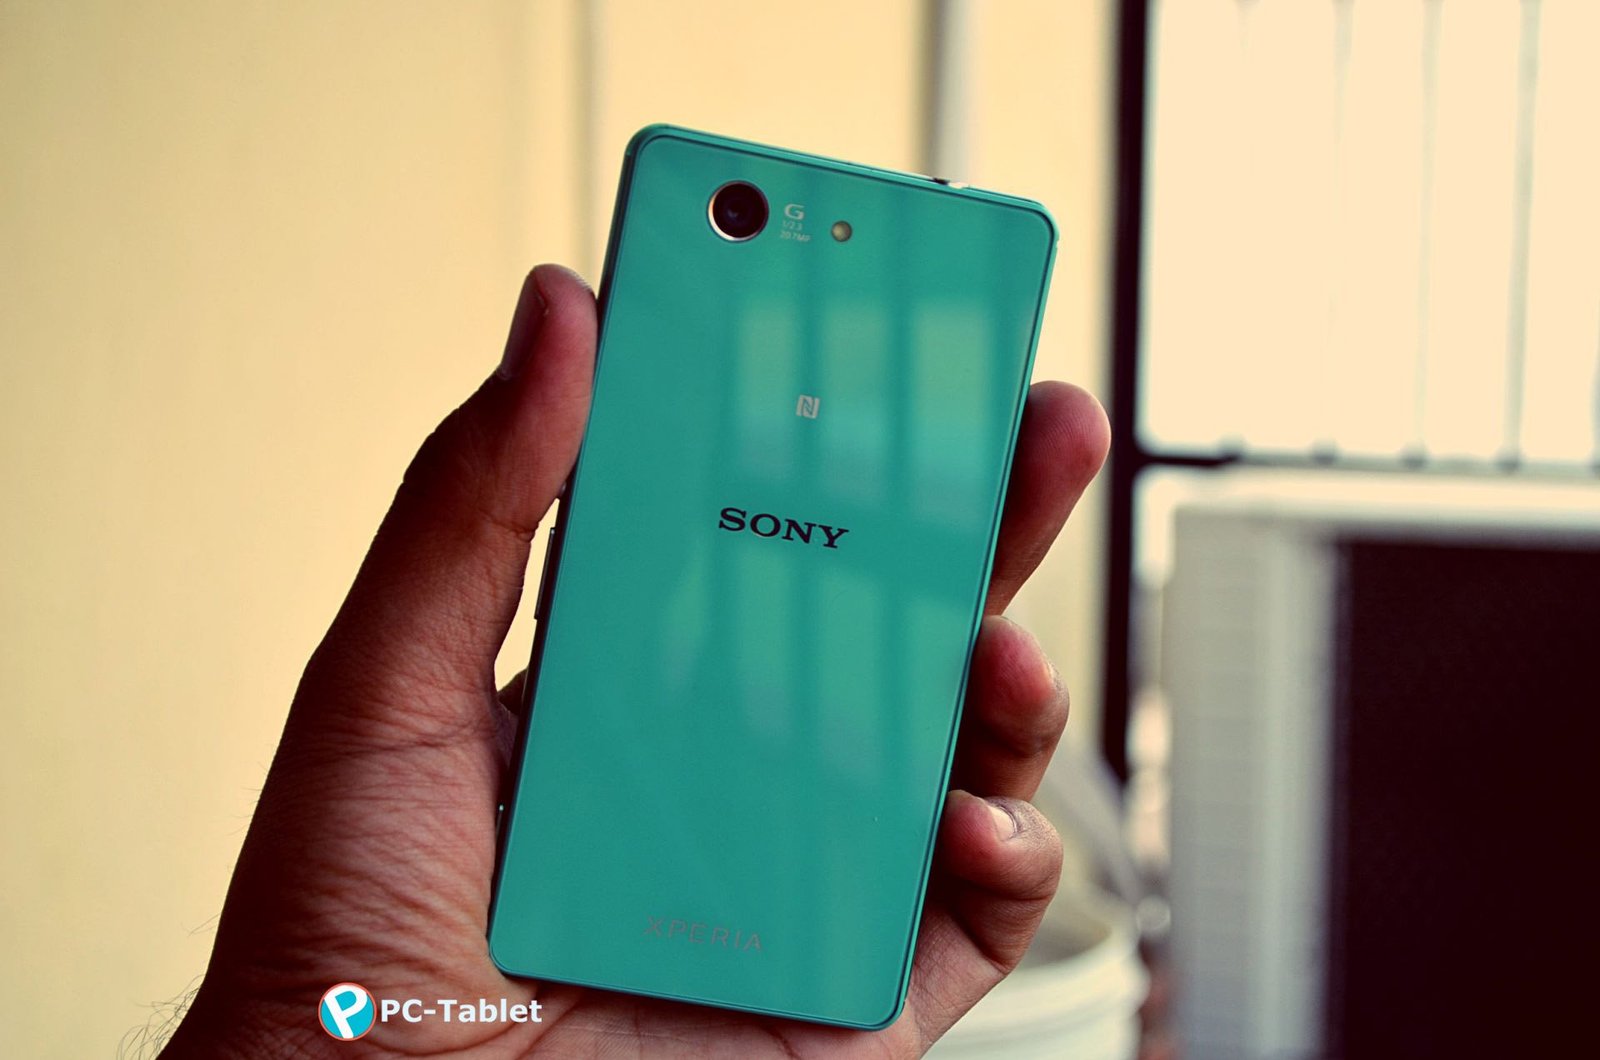 Sony Xperia Z3 Compact Android Hands-on Specifications and Review